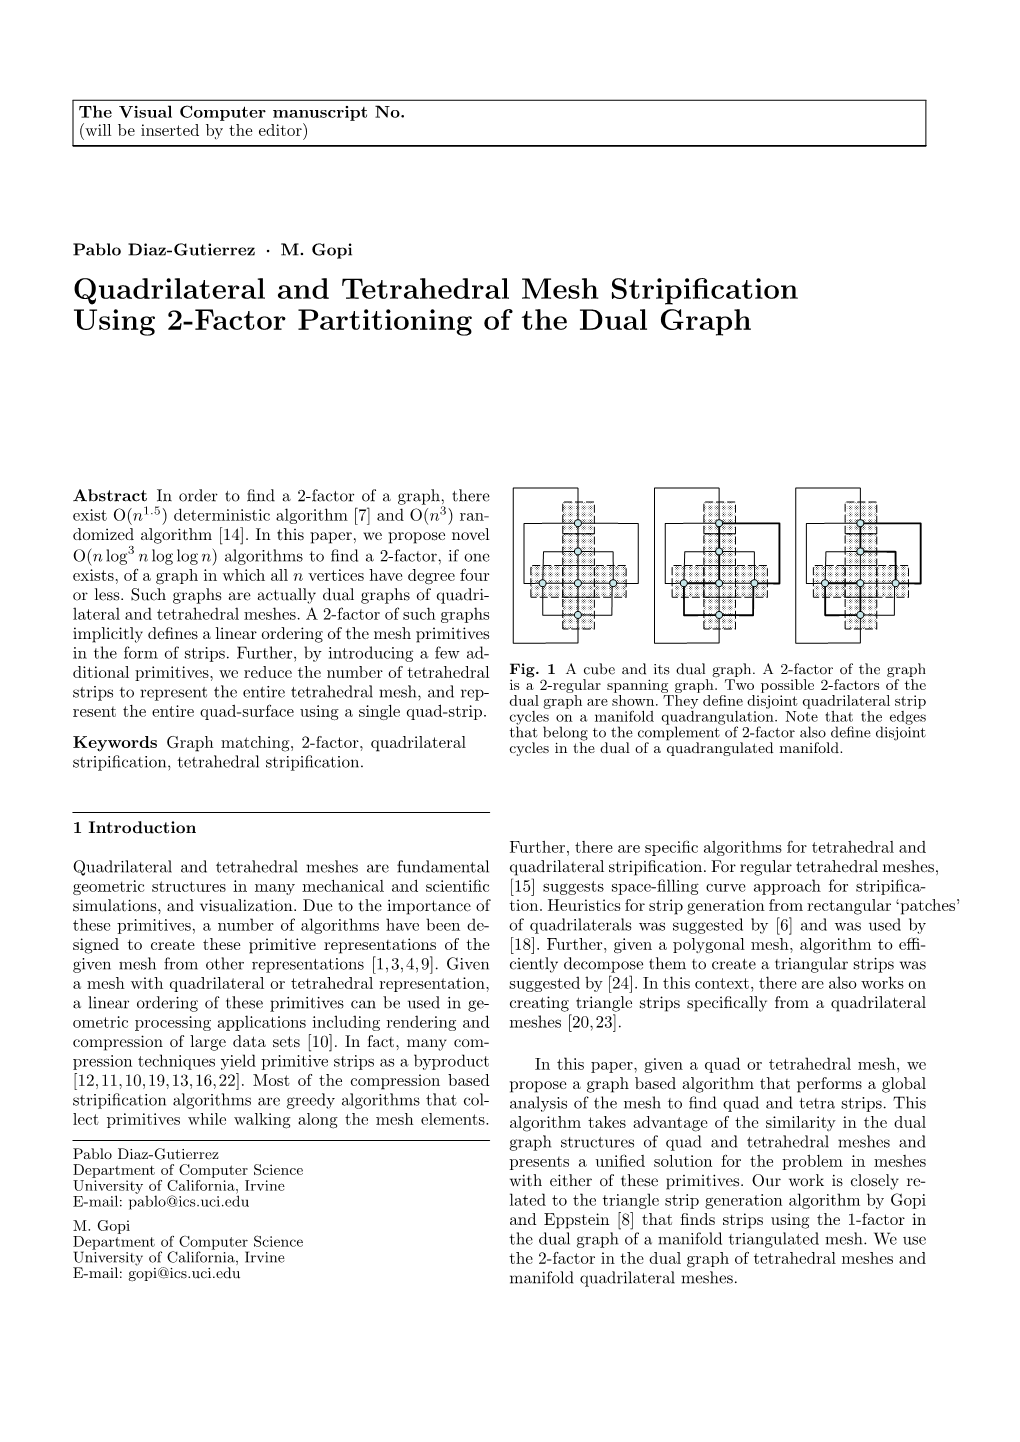 Quadrilateral and Tetrahedral Mesh Stripification Using 2-Factor